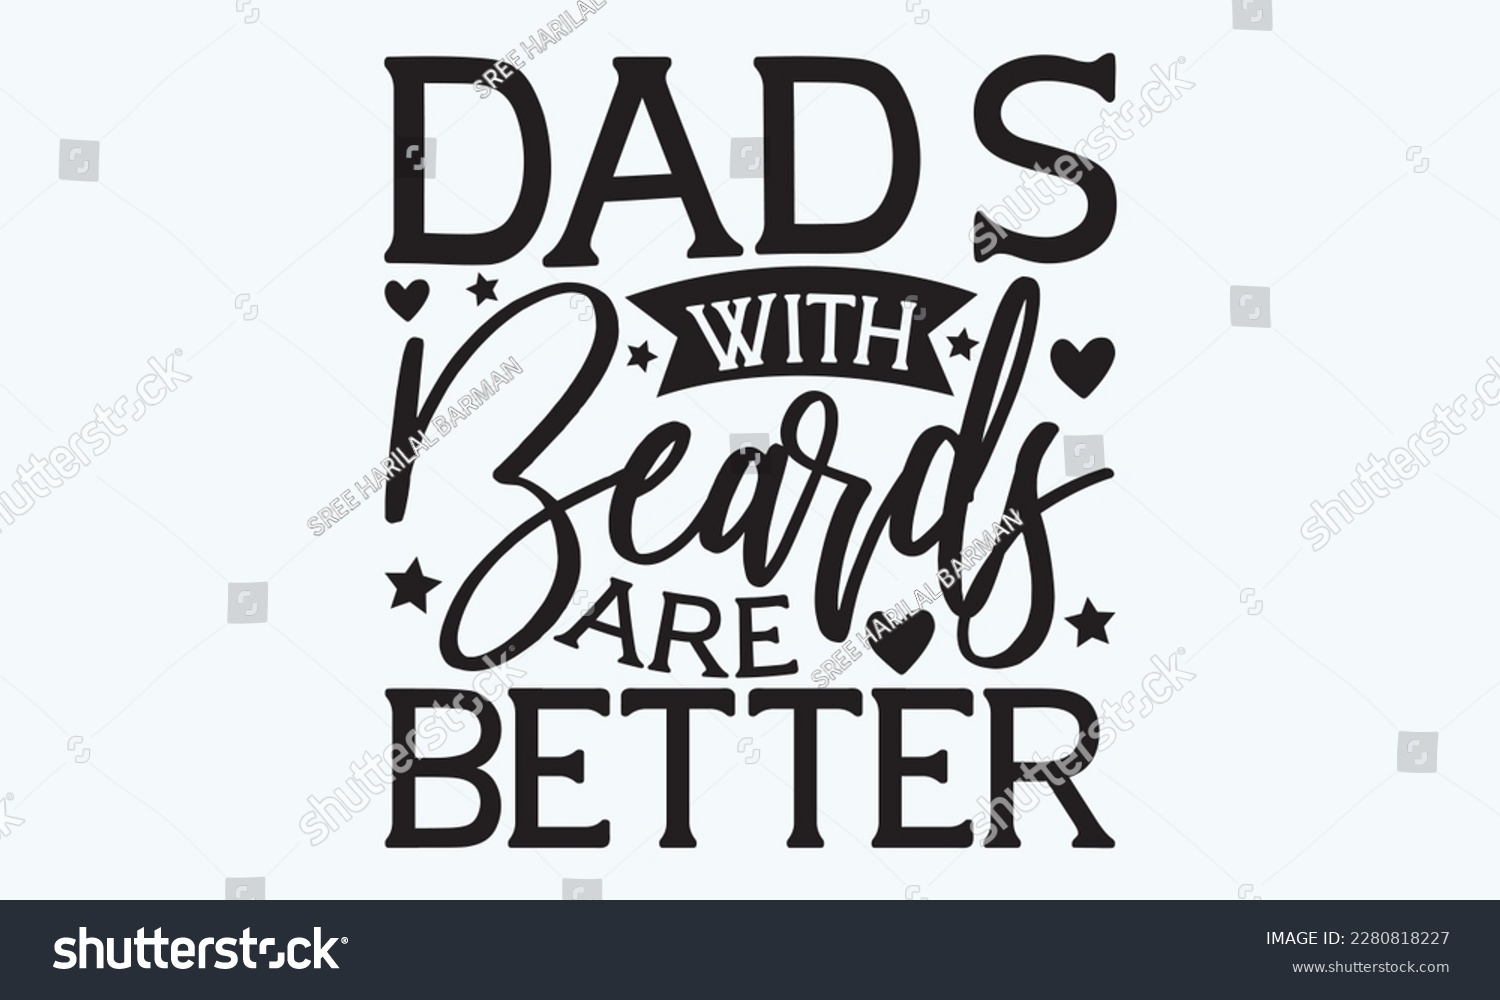 SVG of Dads with beards are better - Father's day Svg typography t-shirt design, svg Files for Cutting Cricut and Silhouette, card, template Hand drawn lettering phrase, Calligraphy t-shirt design, eps 10. svg